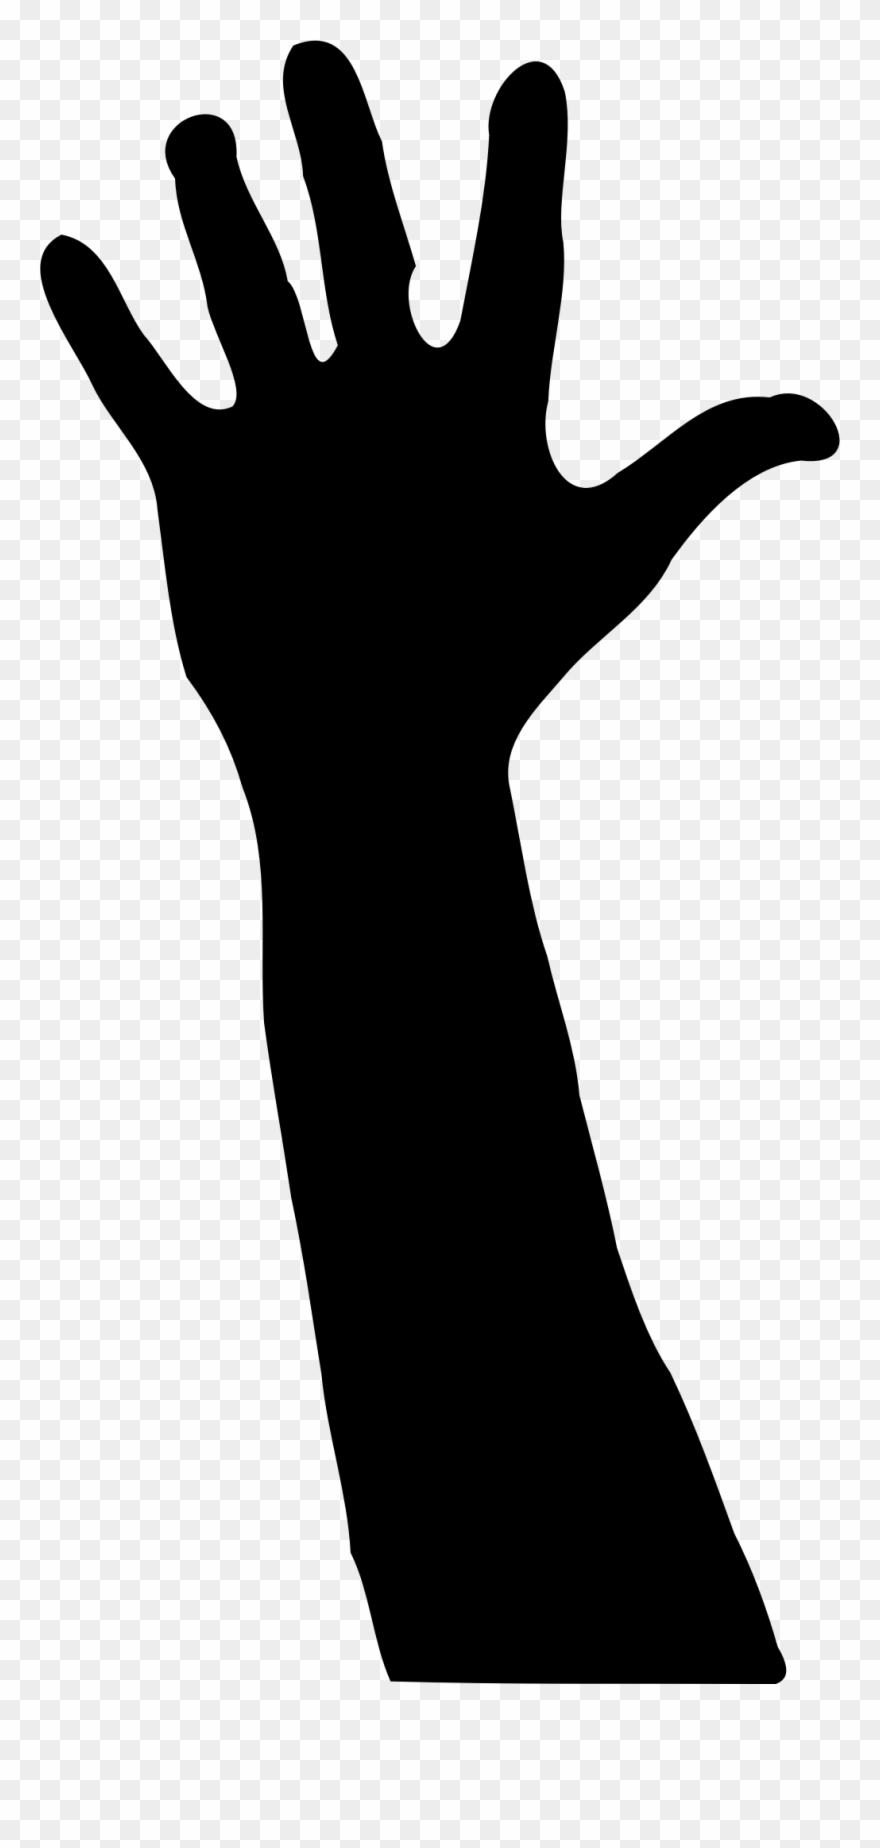 Hand Silhouette Clipart.